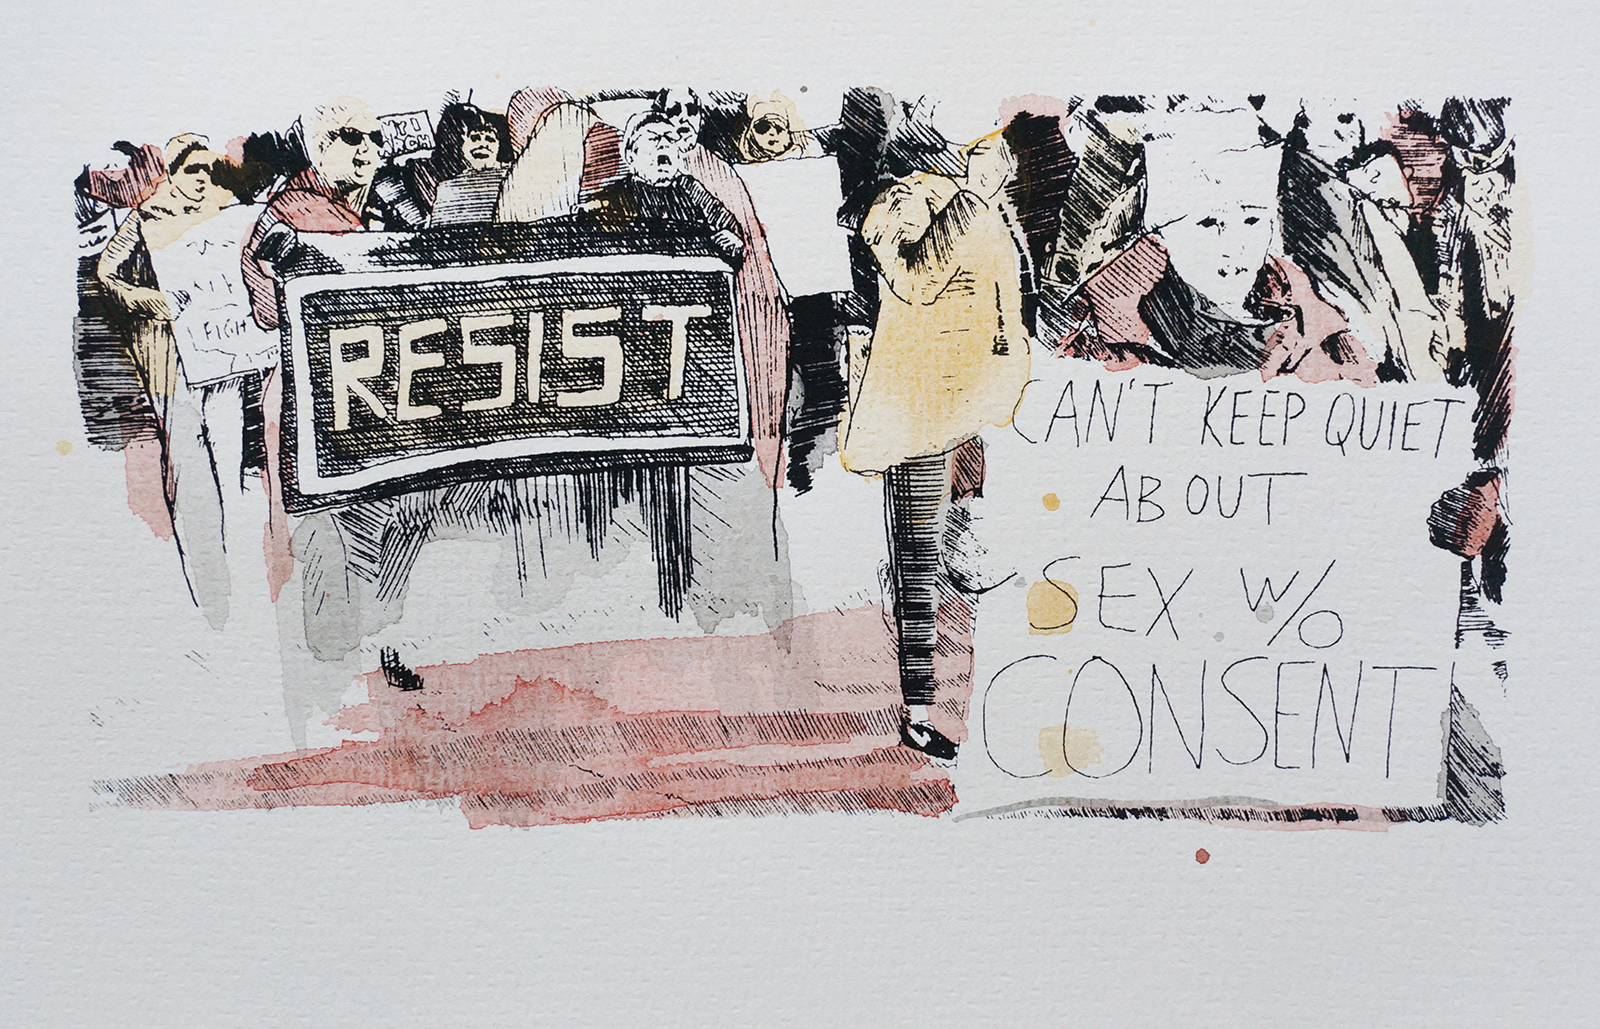 Ape_Bleakney_March Mixed Media - 'Can't Keep Quiet (3)', 6.5''x9.5'', Screen Print + Watercolor, 2018 copy.jpg